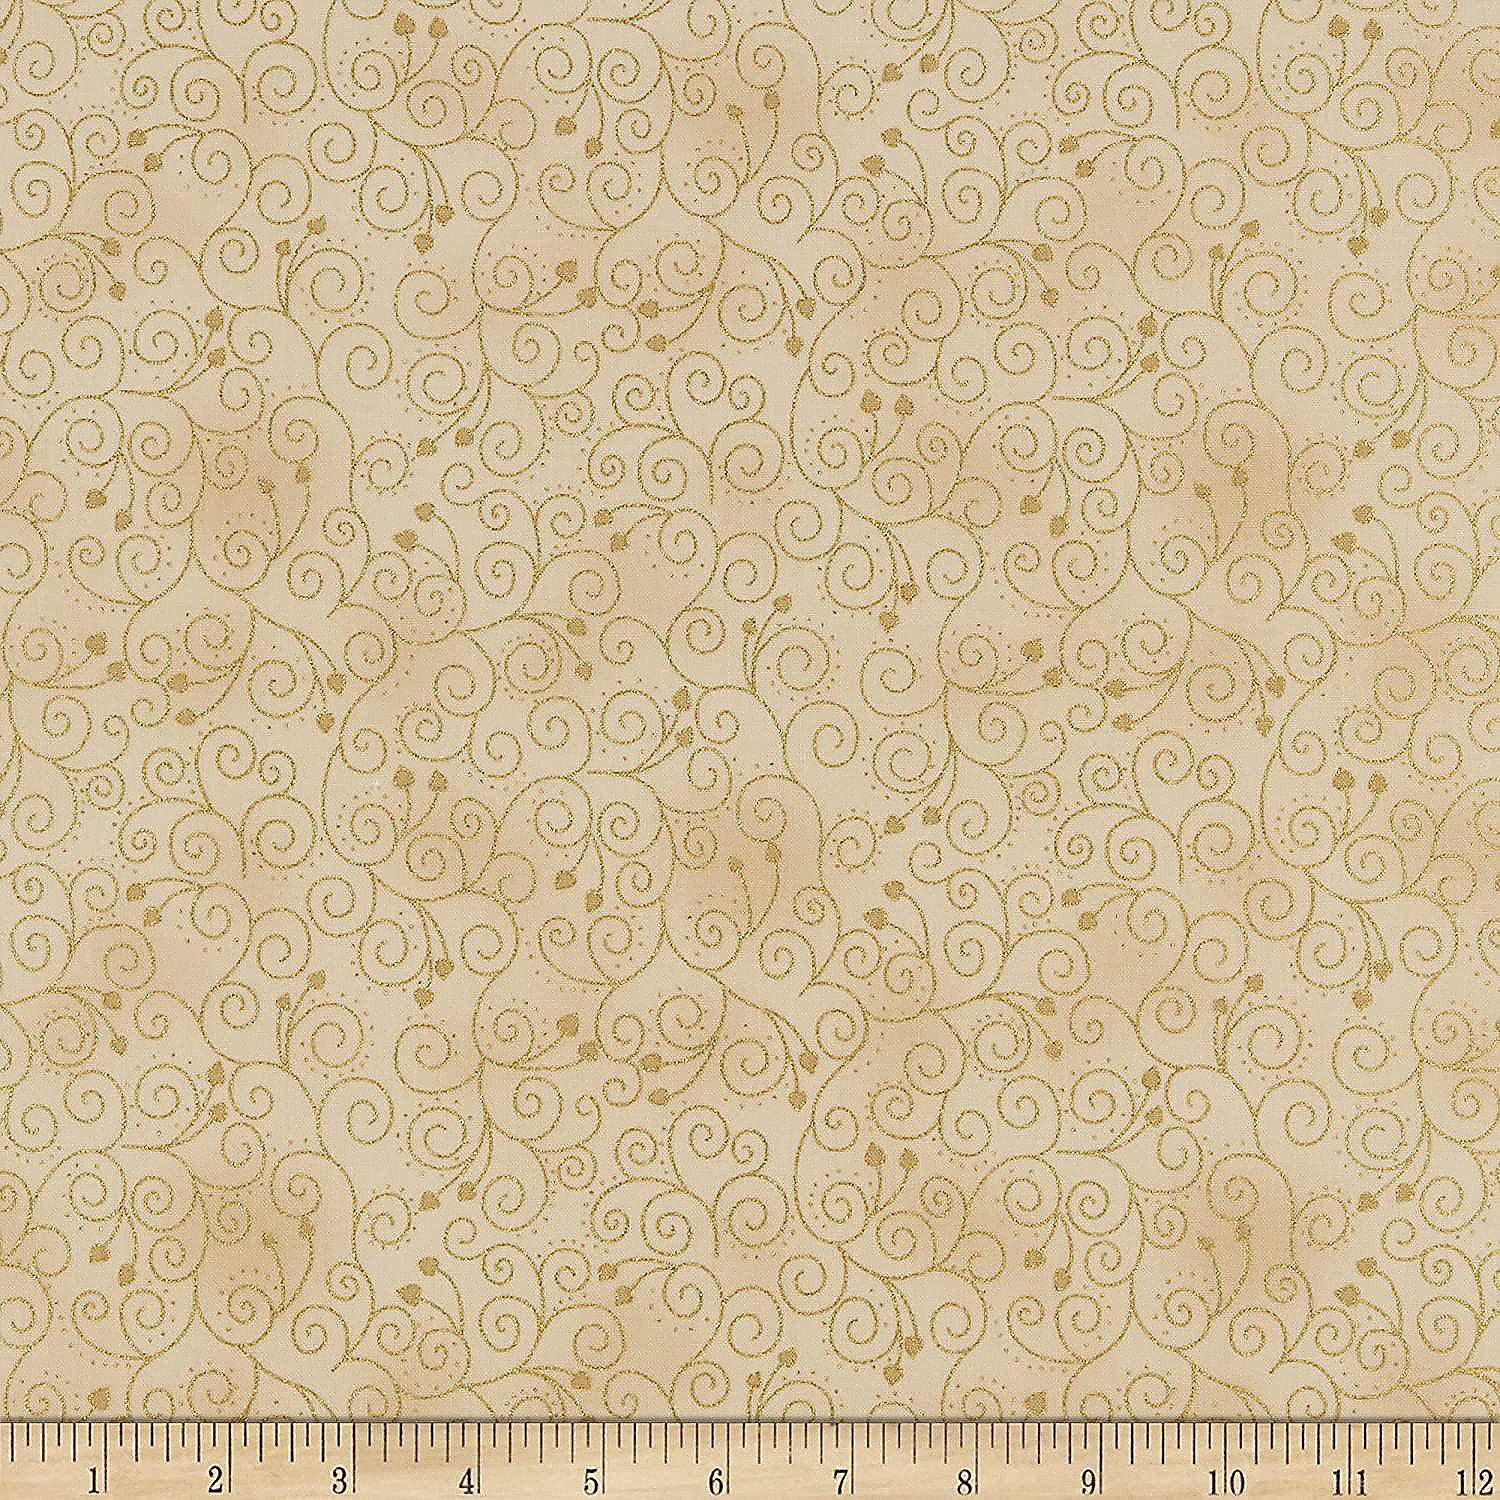 Grens Absoluut reparatie Star Sprinkle Spiral Flowers Beige Gold Cotton Fabric by Stof sold by the  yard | Oriental Trading